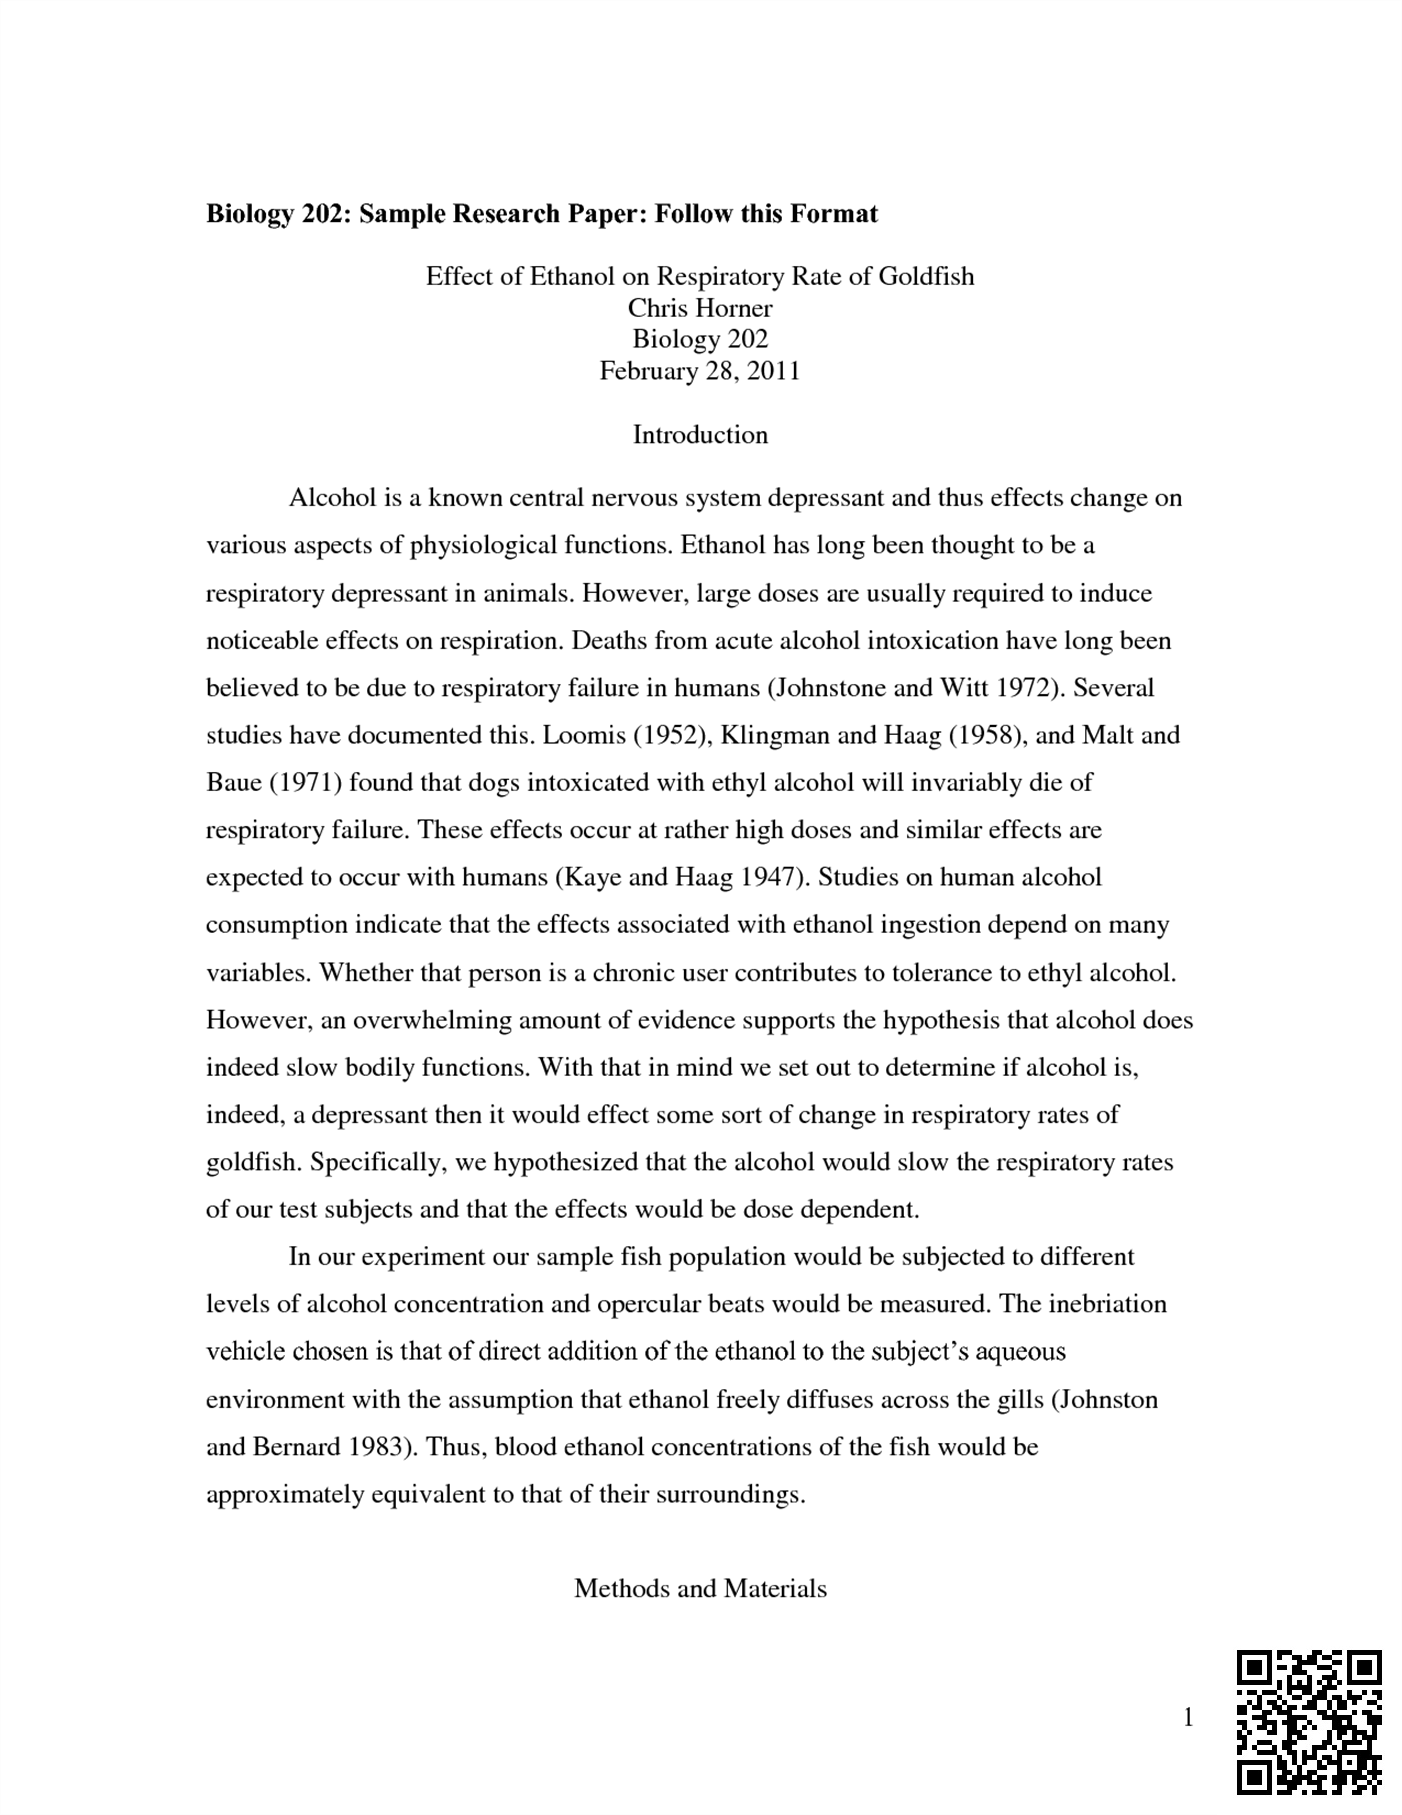 Abstract of a Research Paper Example